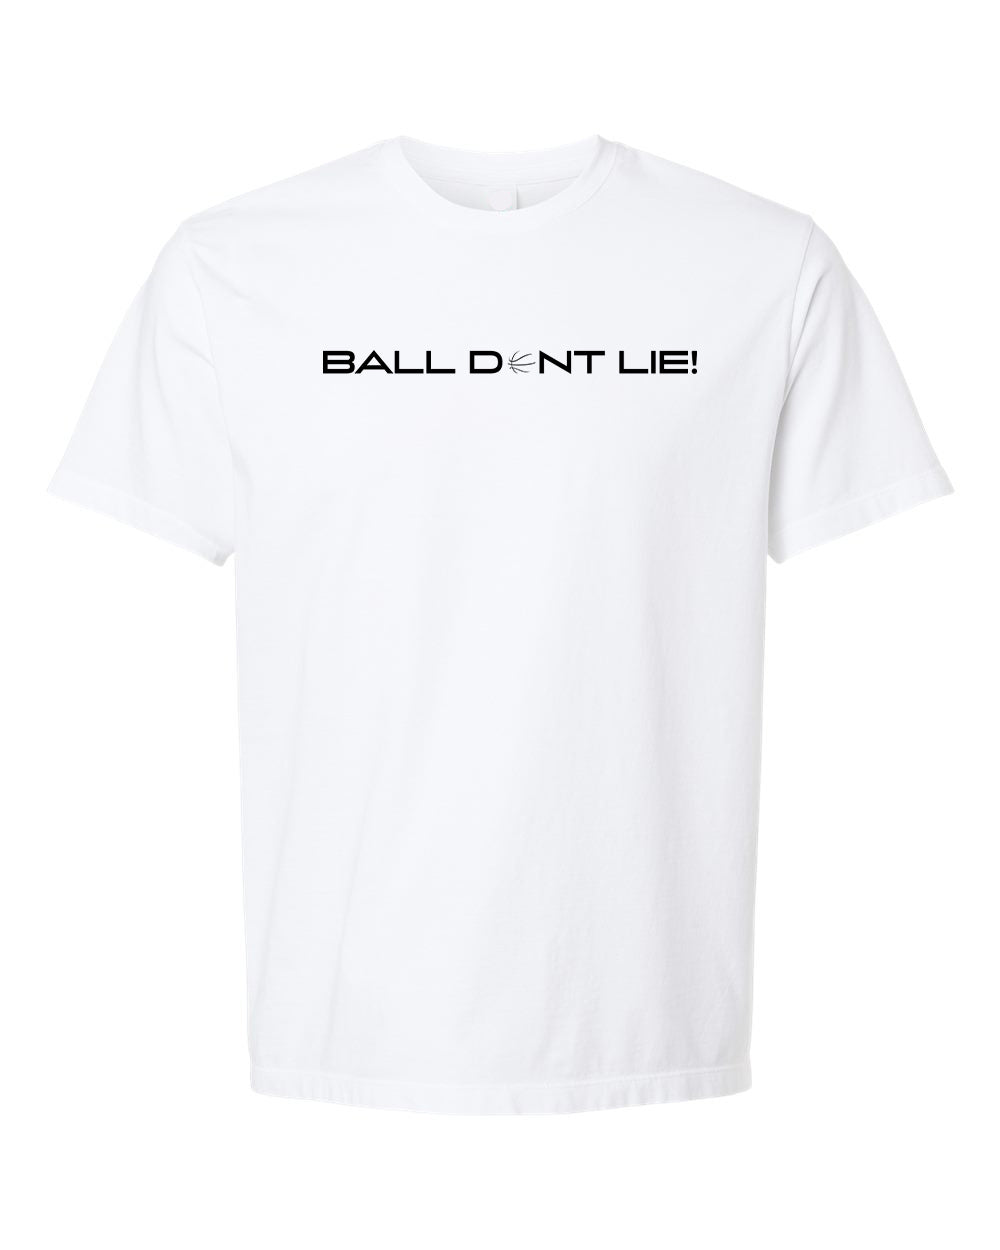 "Ball Don't Lie!" Youth Tee (color options available)